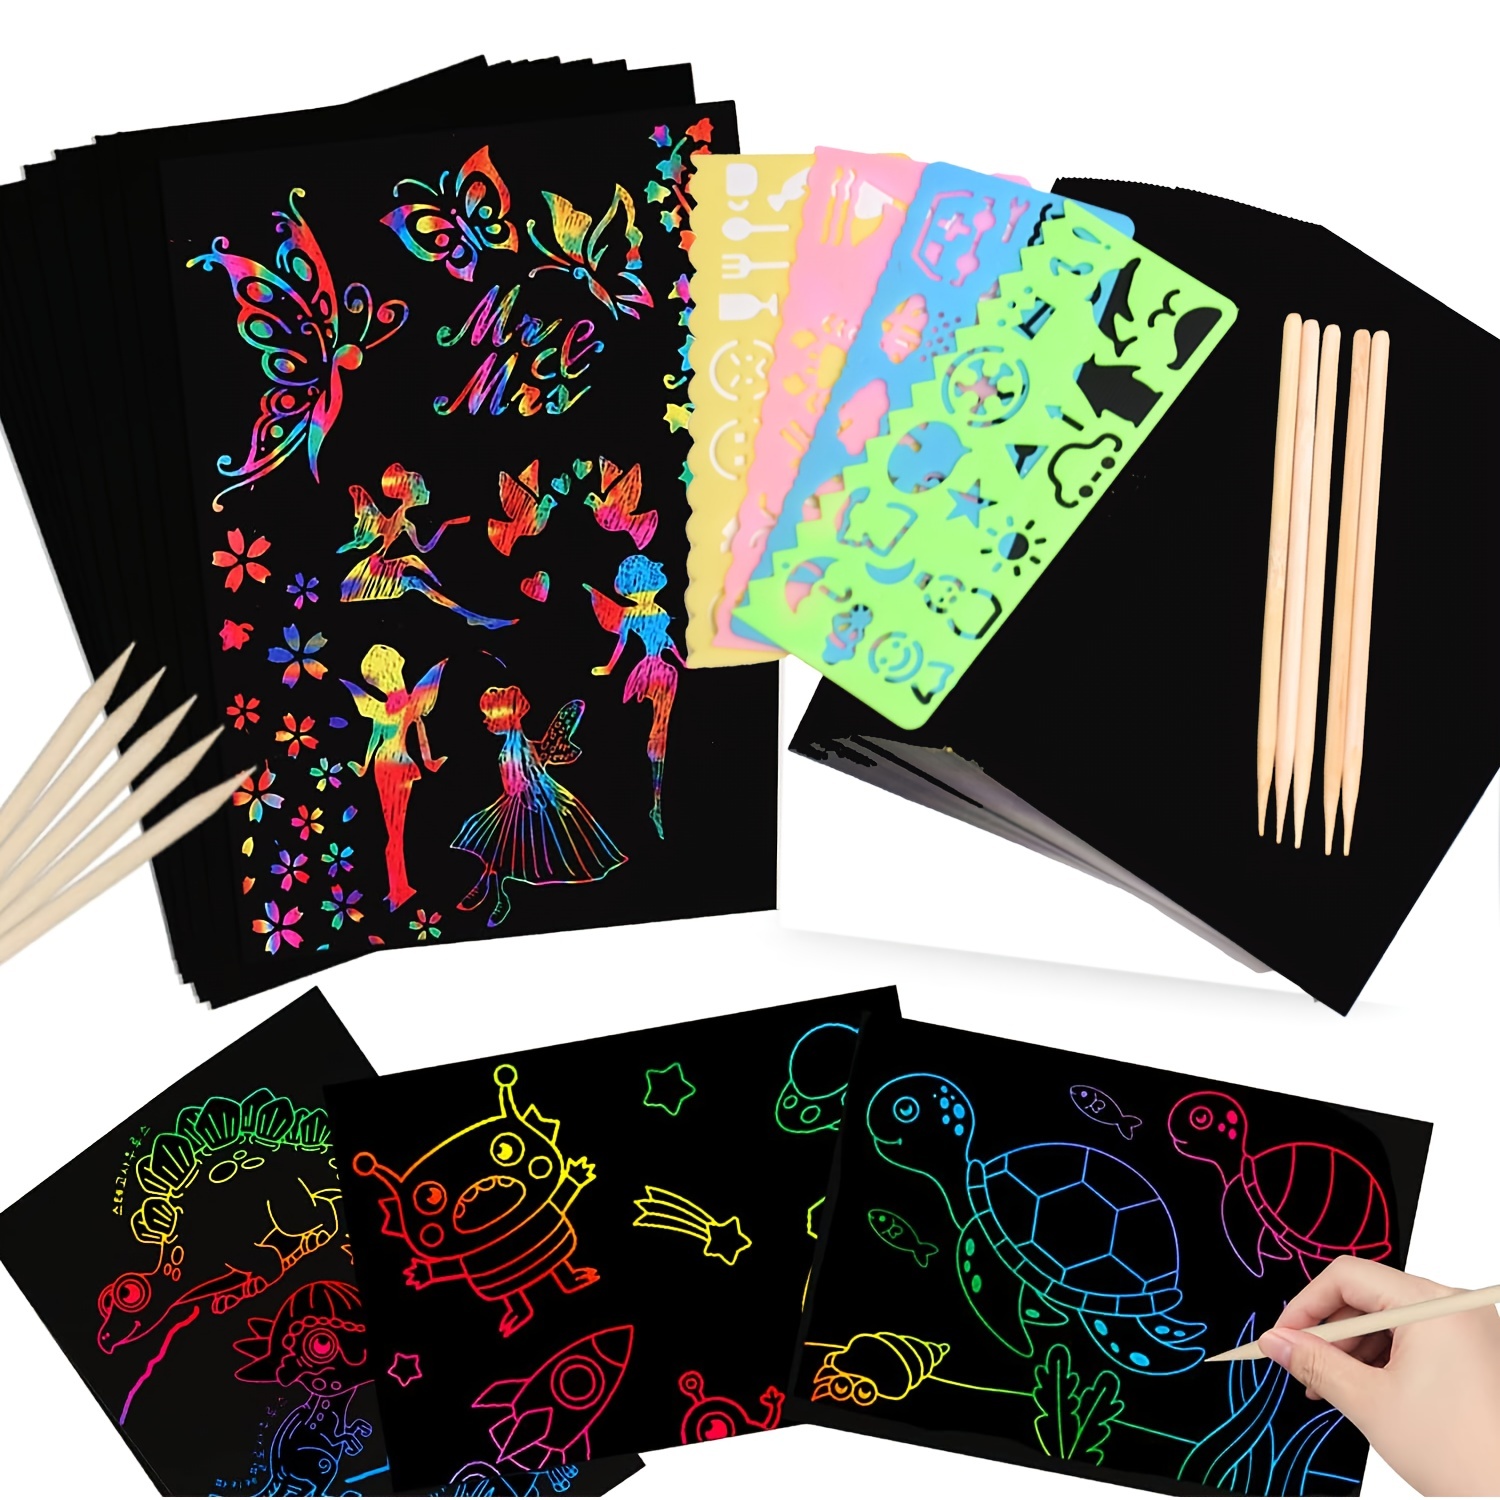 Scratch Art Painting Kits for Adults & Kids, Rainbow Painting Sketch Night  View Scratchboard(A4), Crafts Set: 8 Sheets Scratch Cards with 6 tools in